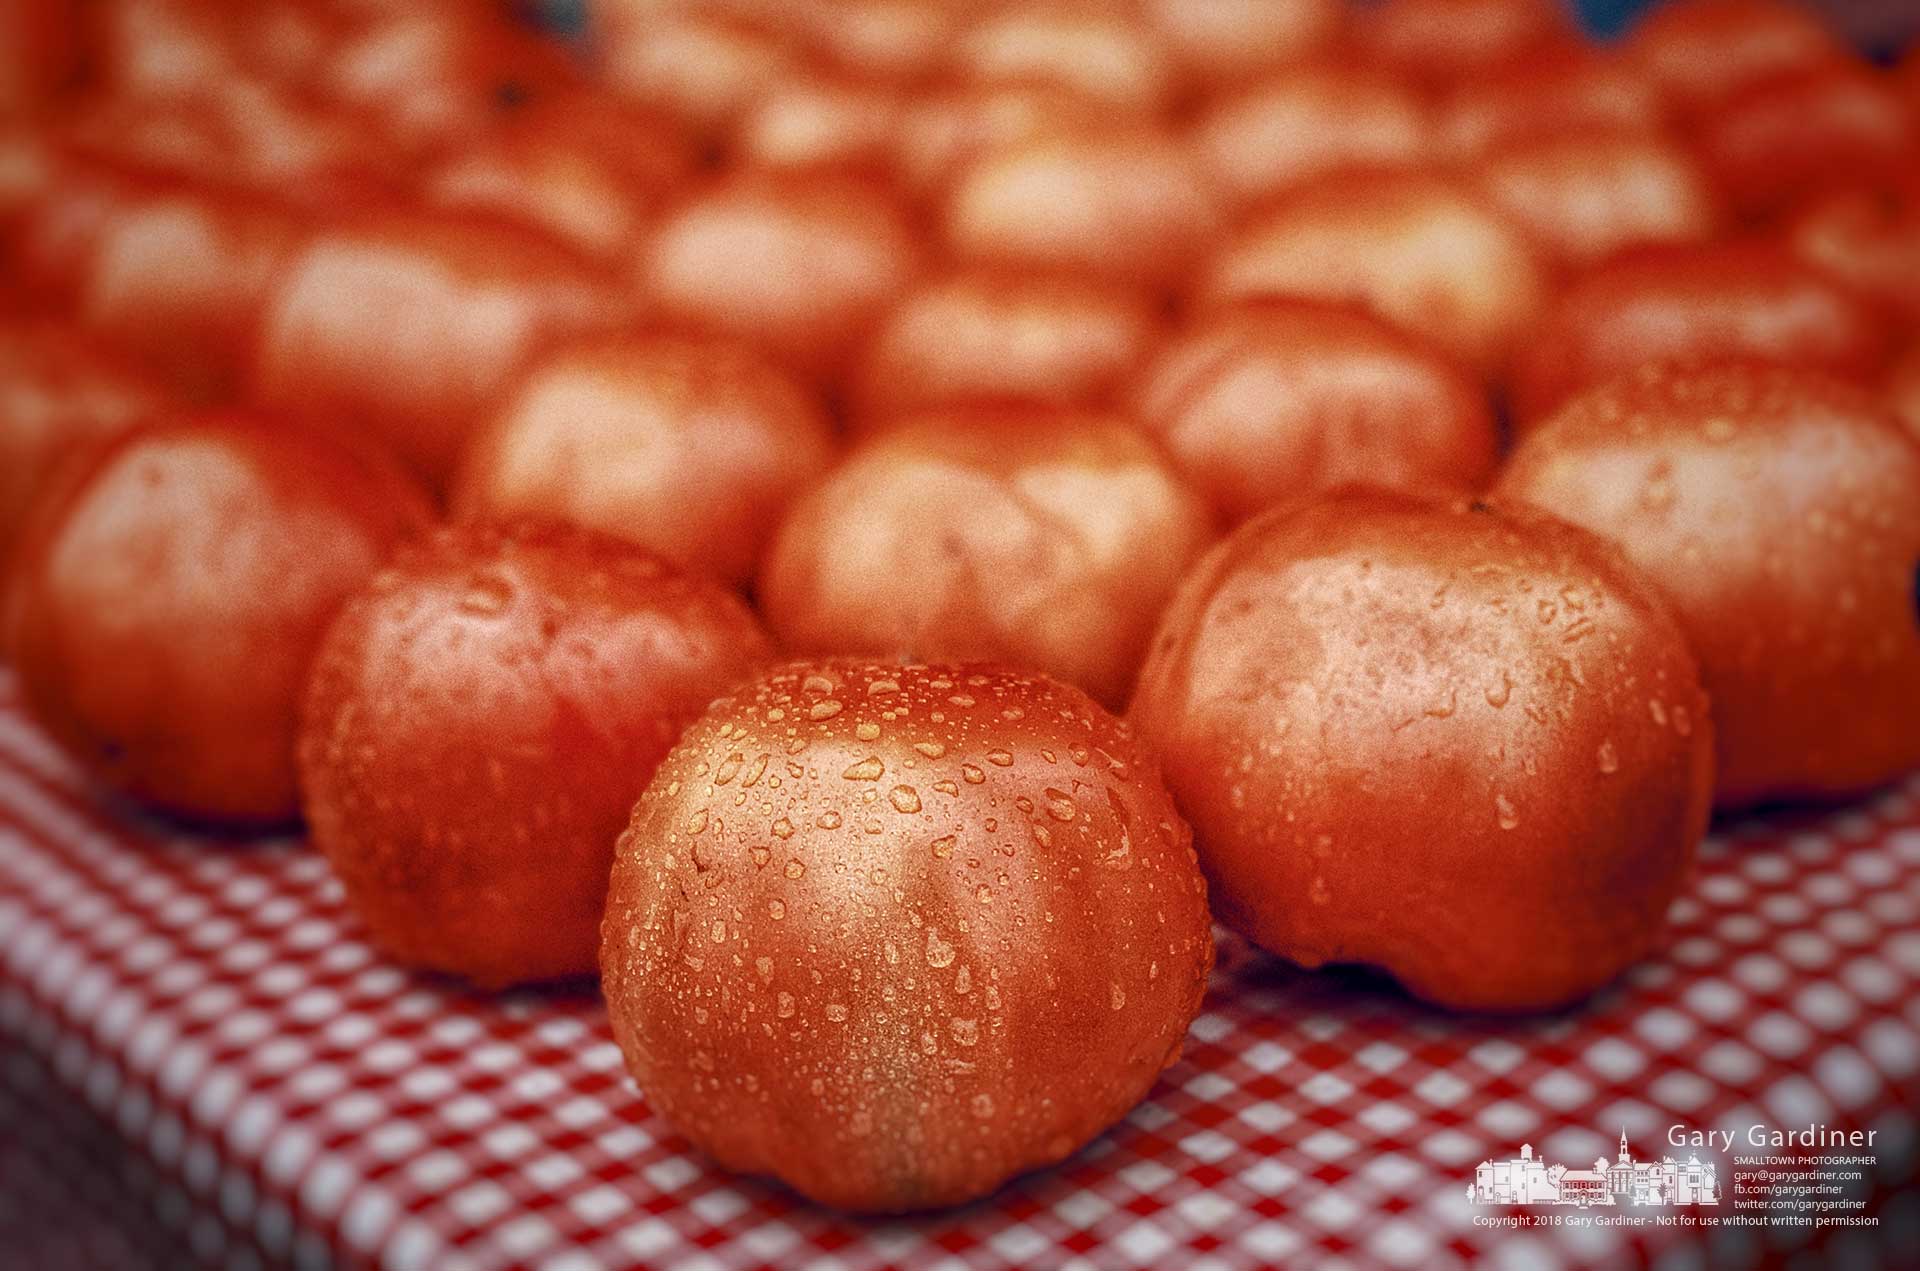 The last batch of fresh tomatoes sit covered with raindrops on the Bird's Haven Farm tables at the Wednesday Farmers Market in Uptown Westerville. My final Photo for Oct. 31, 2018.